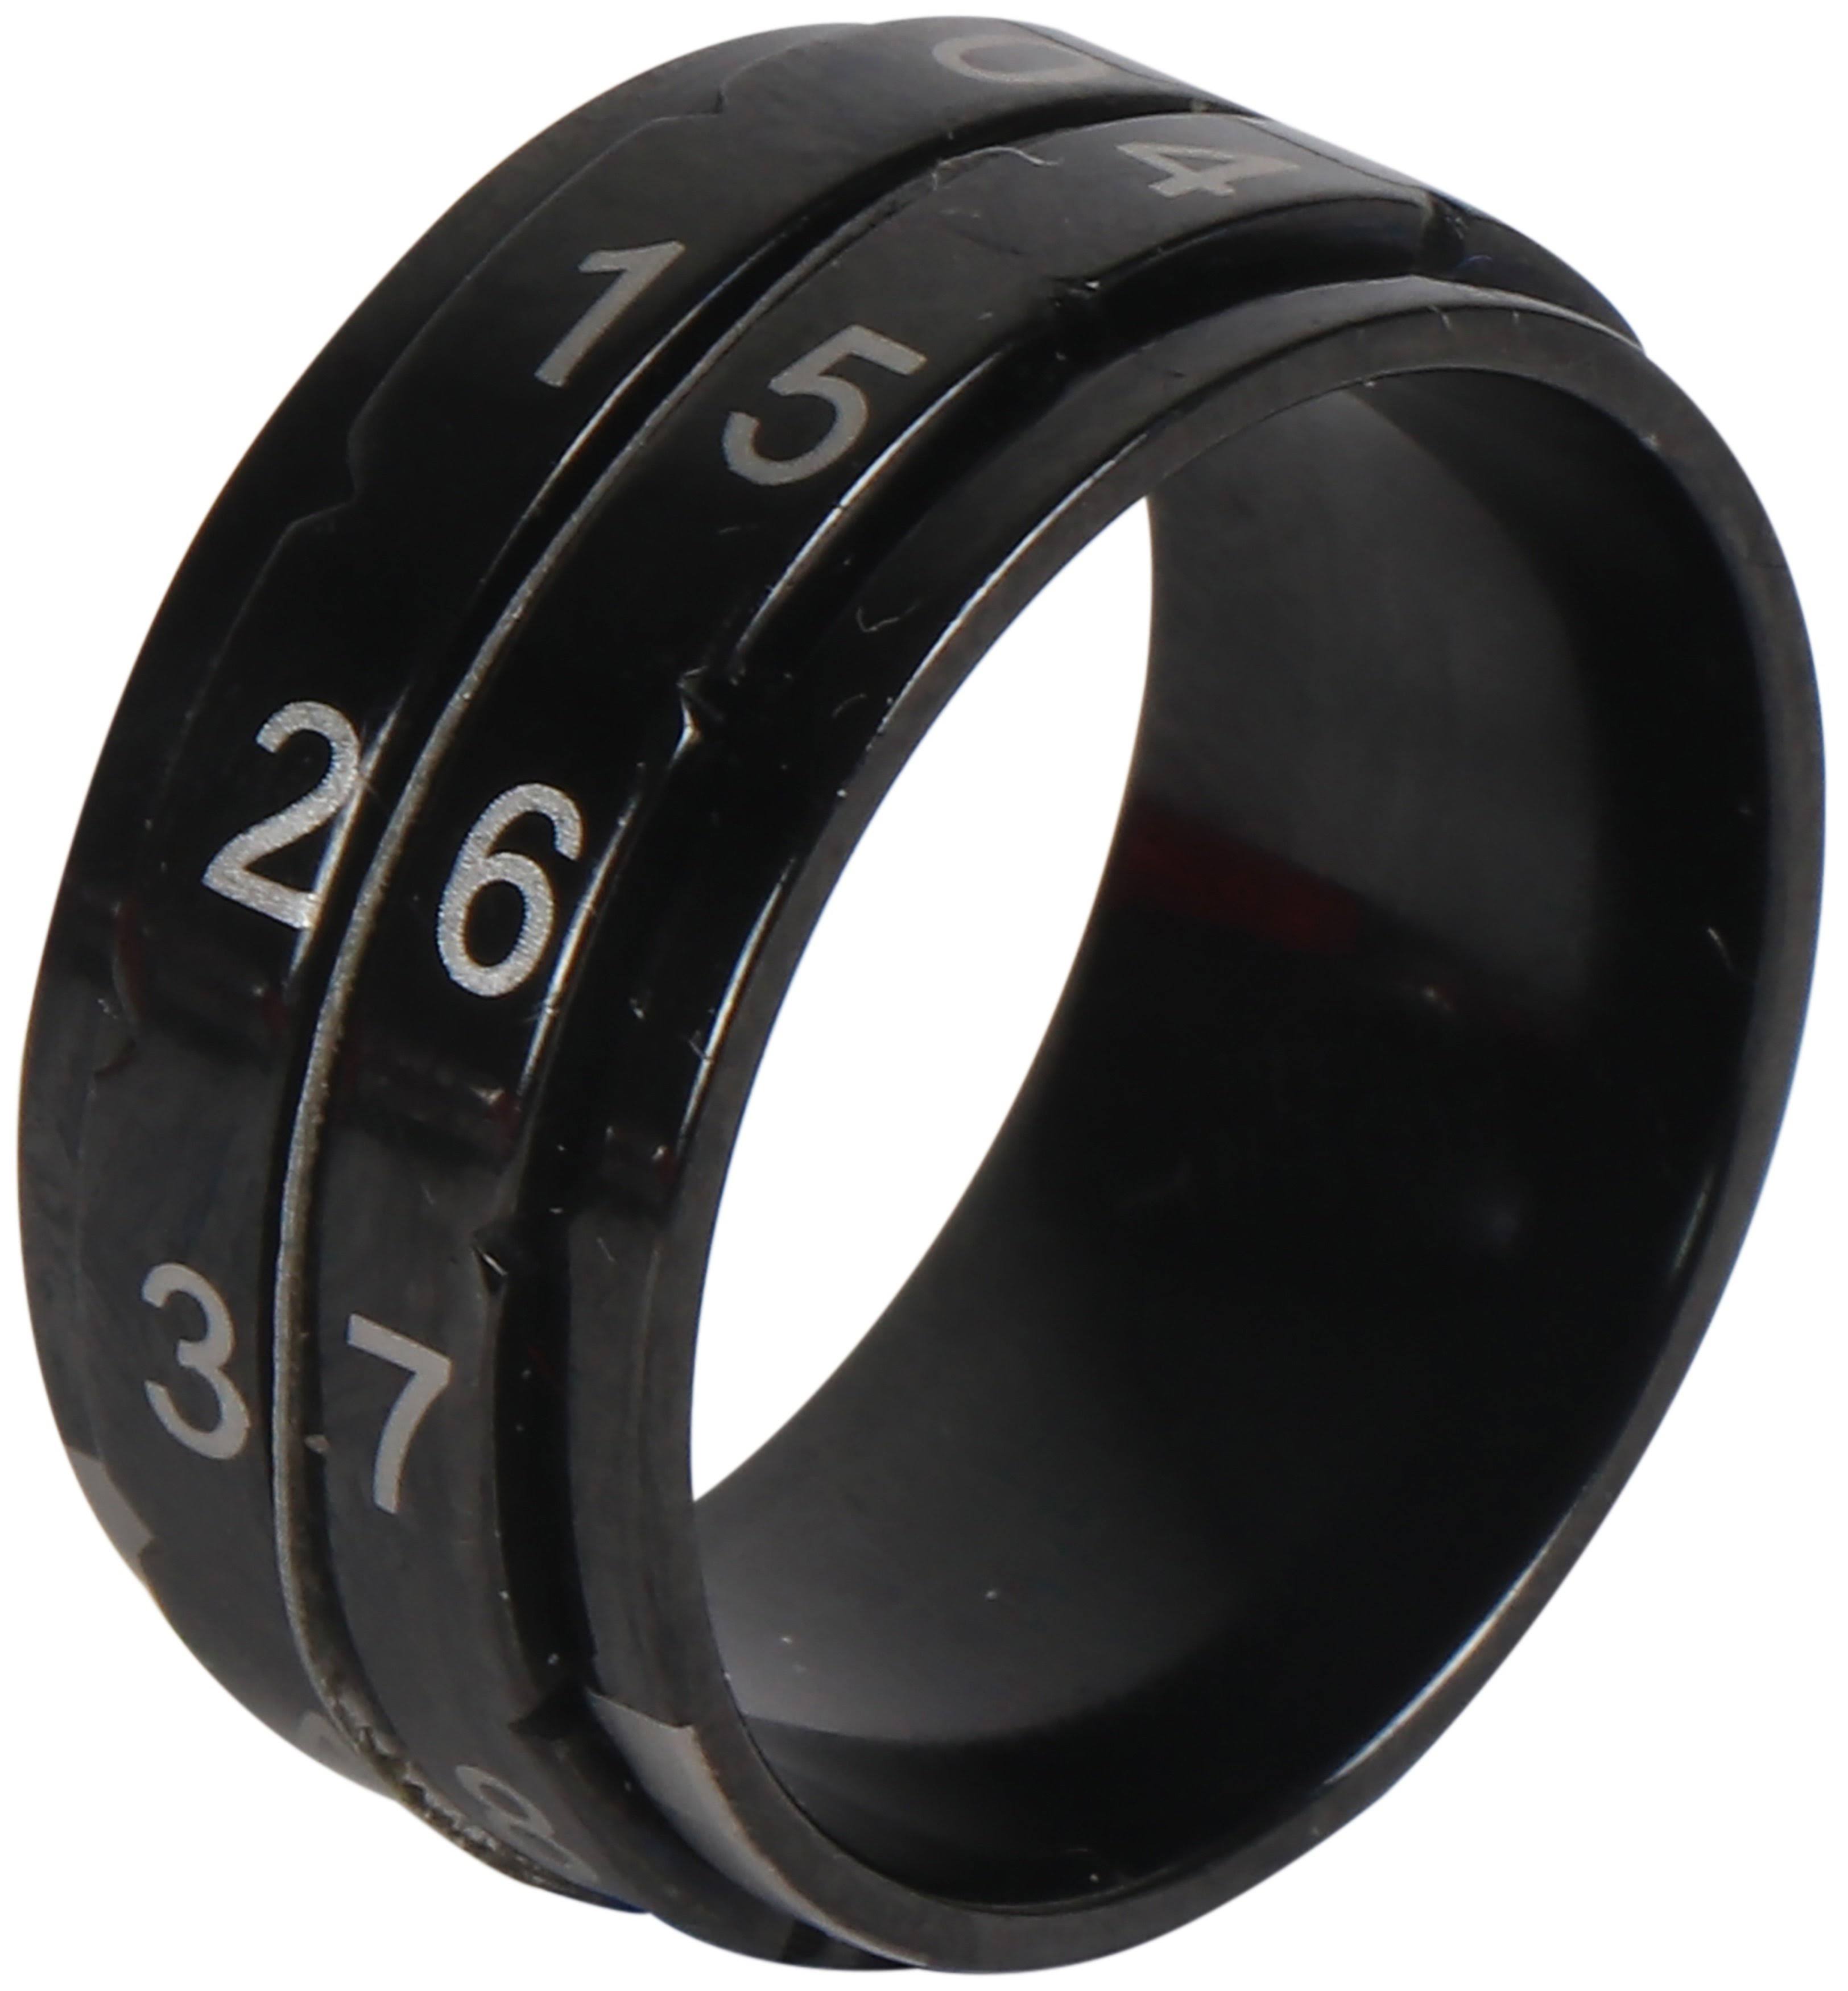 Knitter's Pride Row Counter Ring Size 12: 21.4mm Diameter